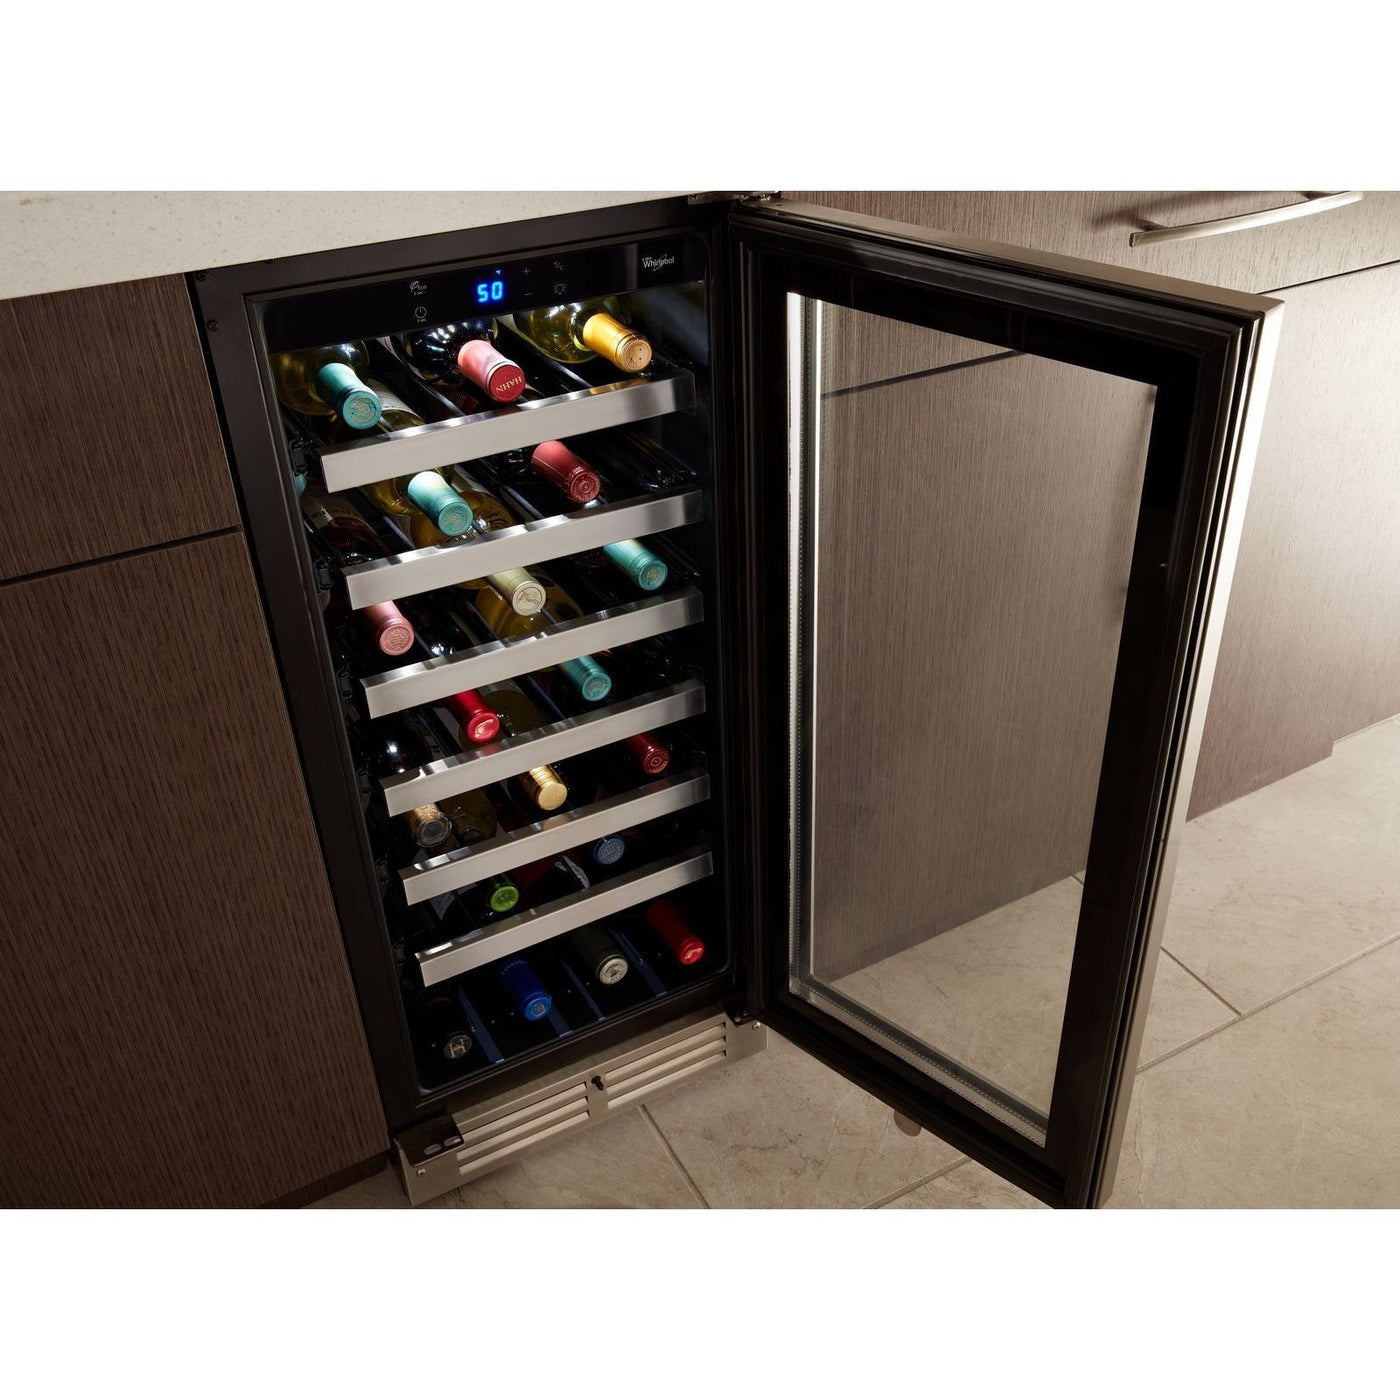 Whirlpool Black-on-Stainless Undercounter Wine Center (7.6 Cu. Ft.) - WUW35X15DS